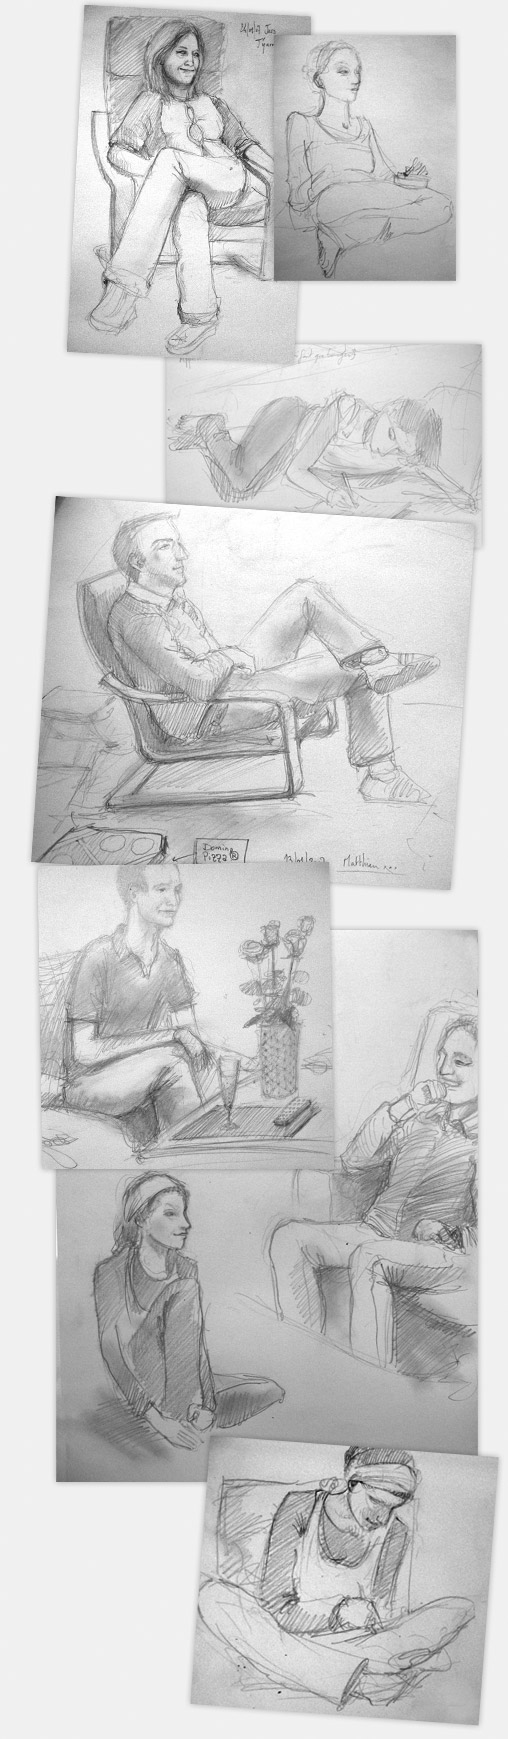 070203 Roommates sketches